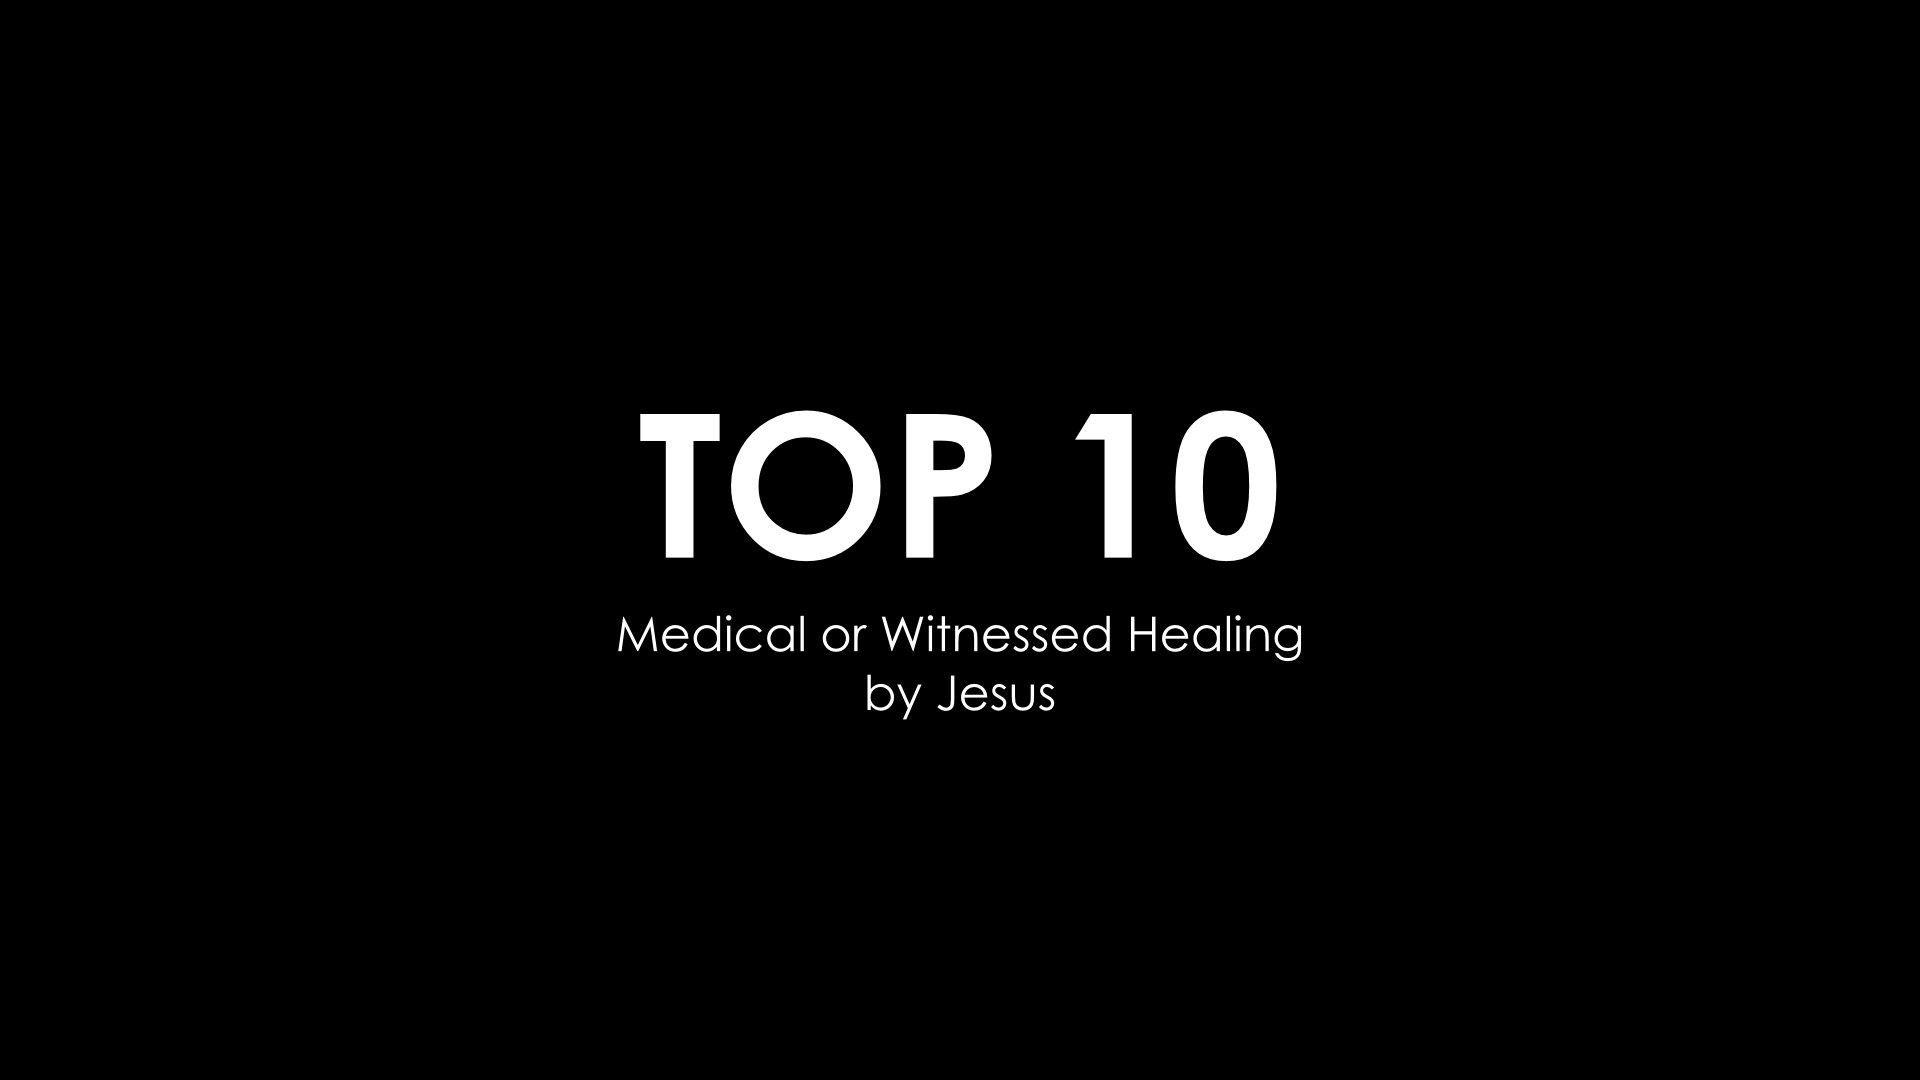 TOP 10 HEALING Miracles by Jesus